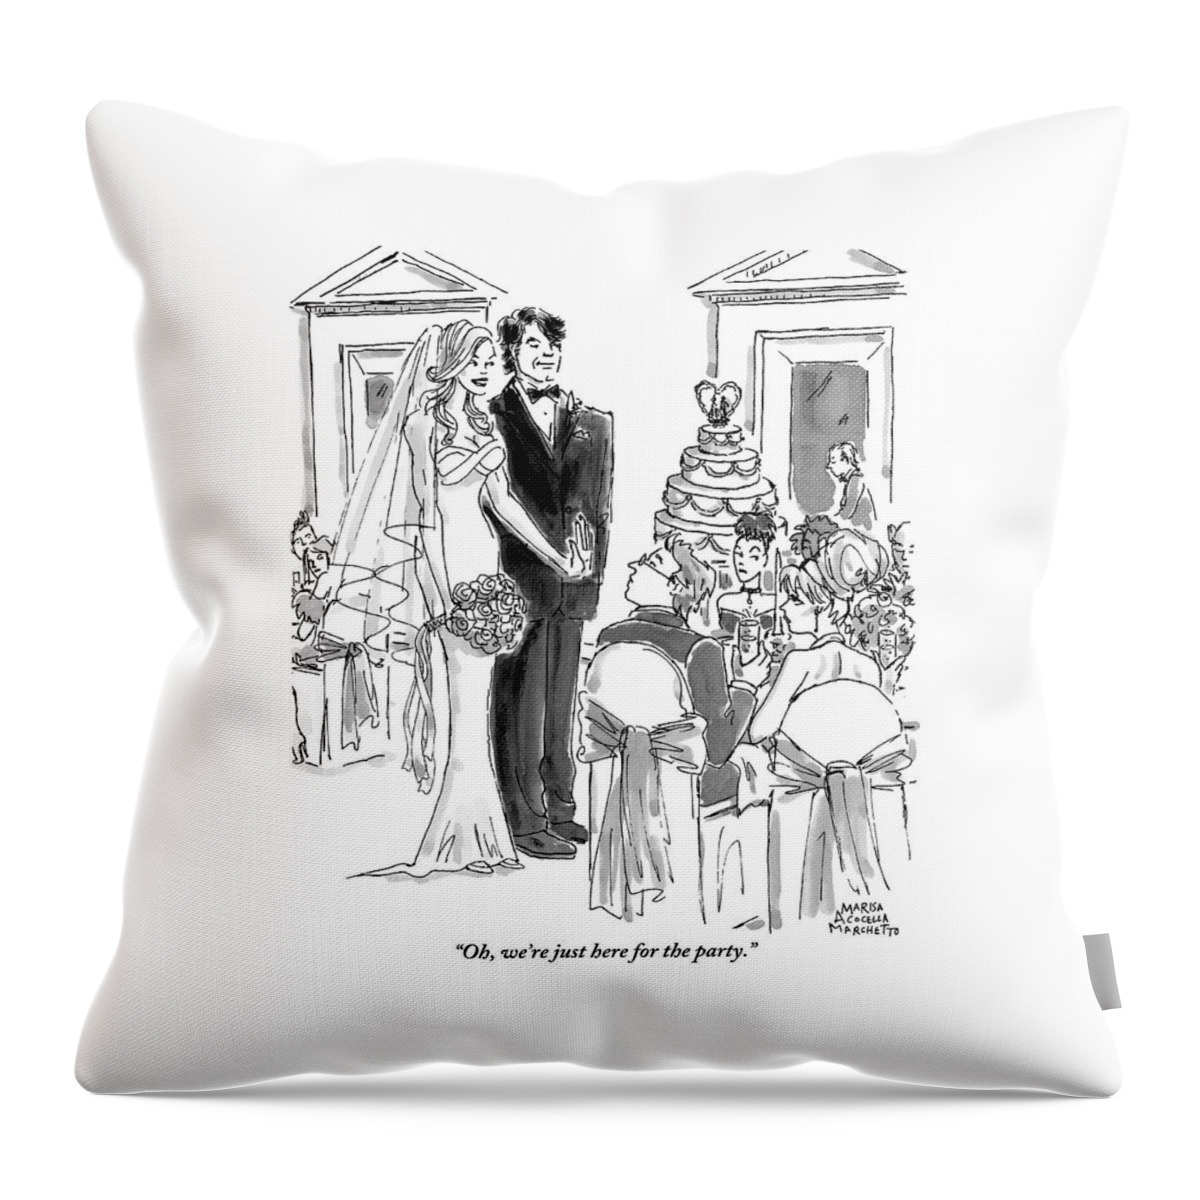 A Bride And Groom To The Guests At Their Wedding Throw Pillow